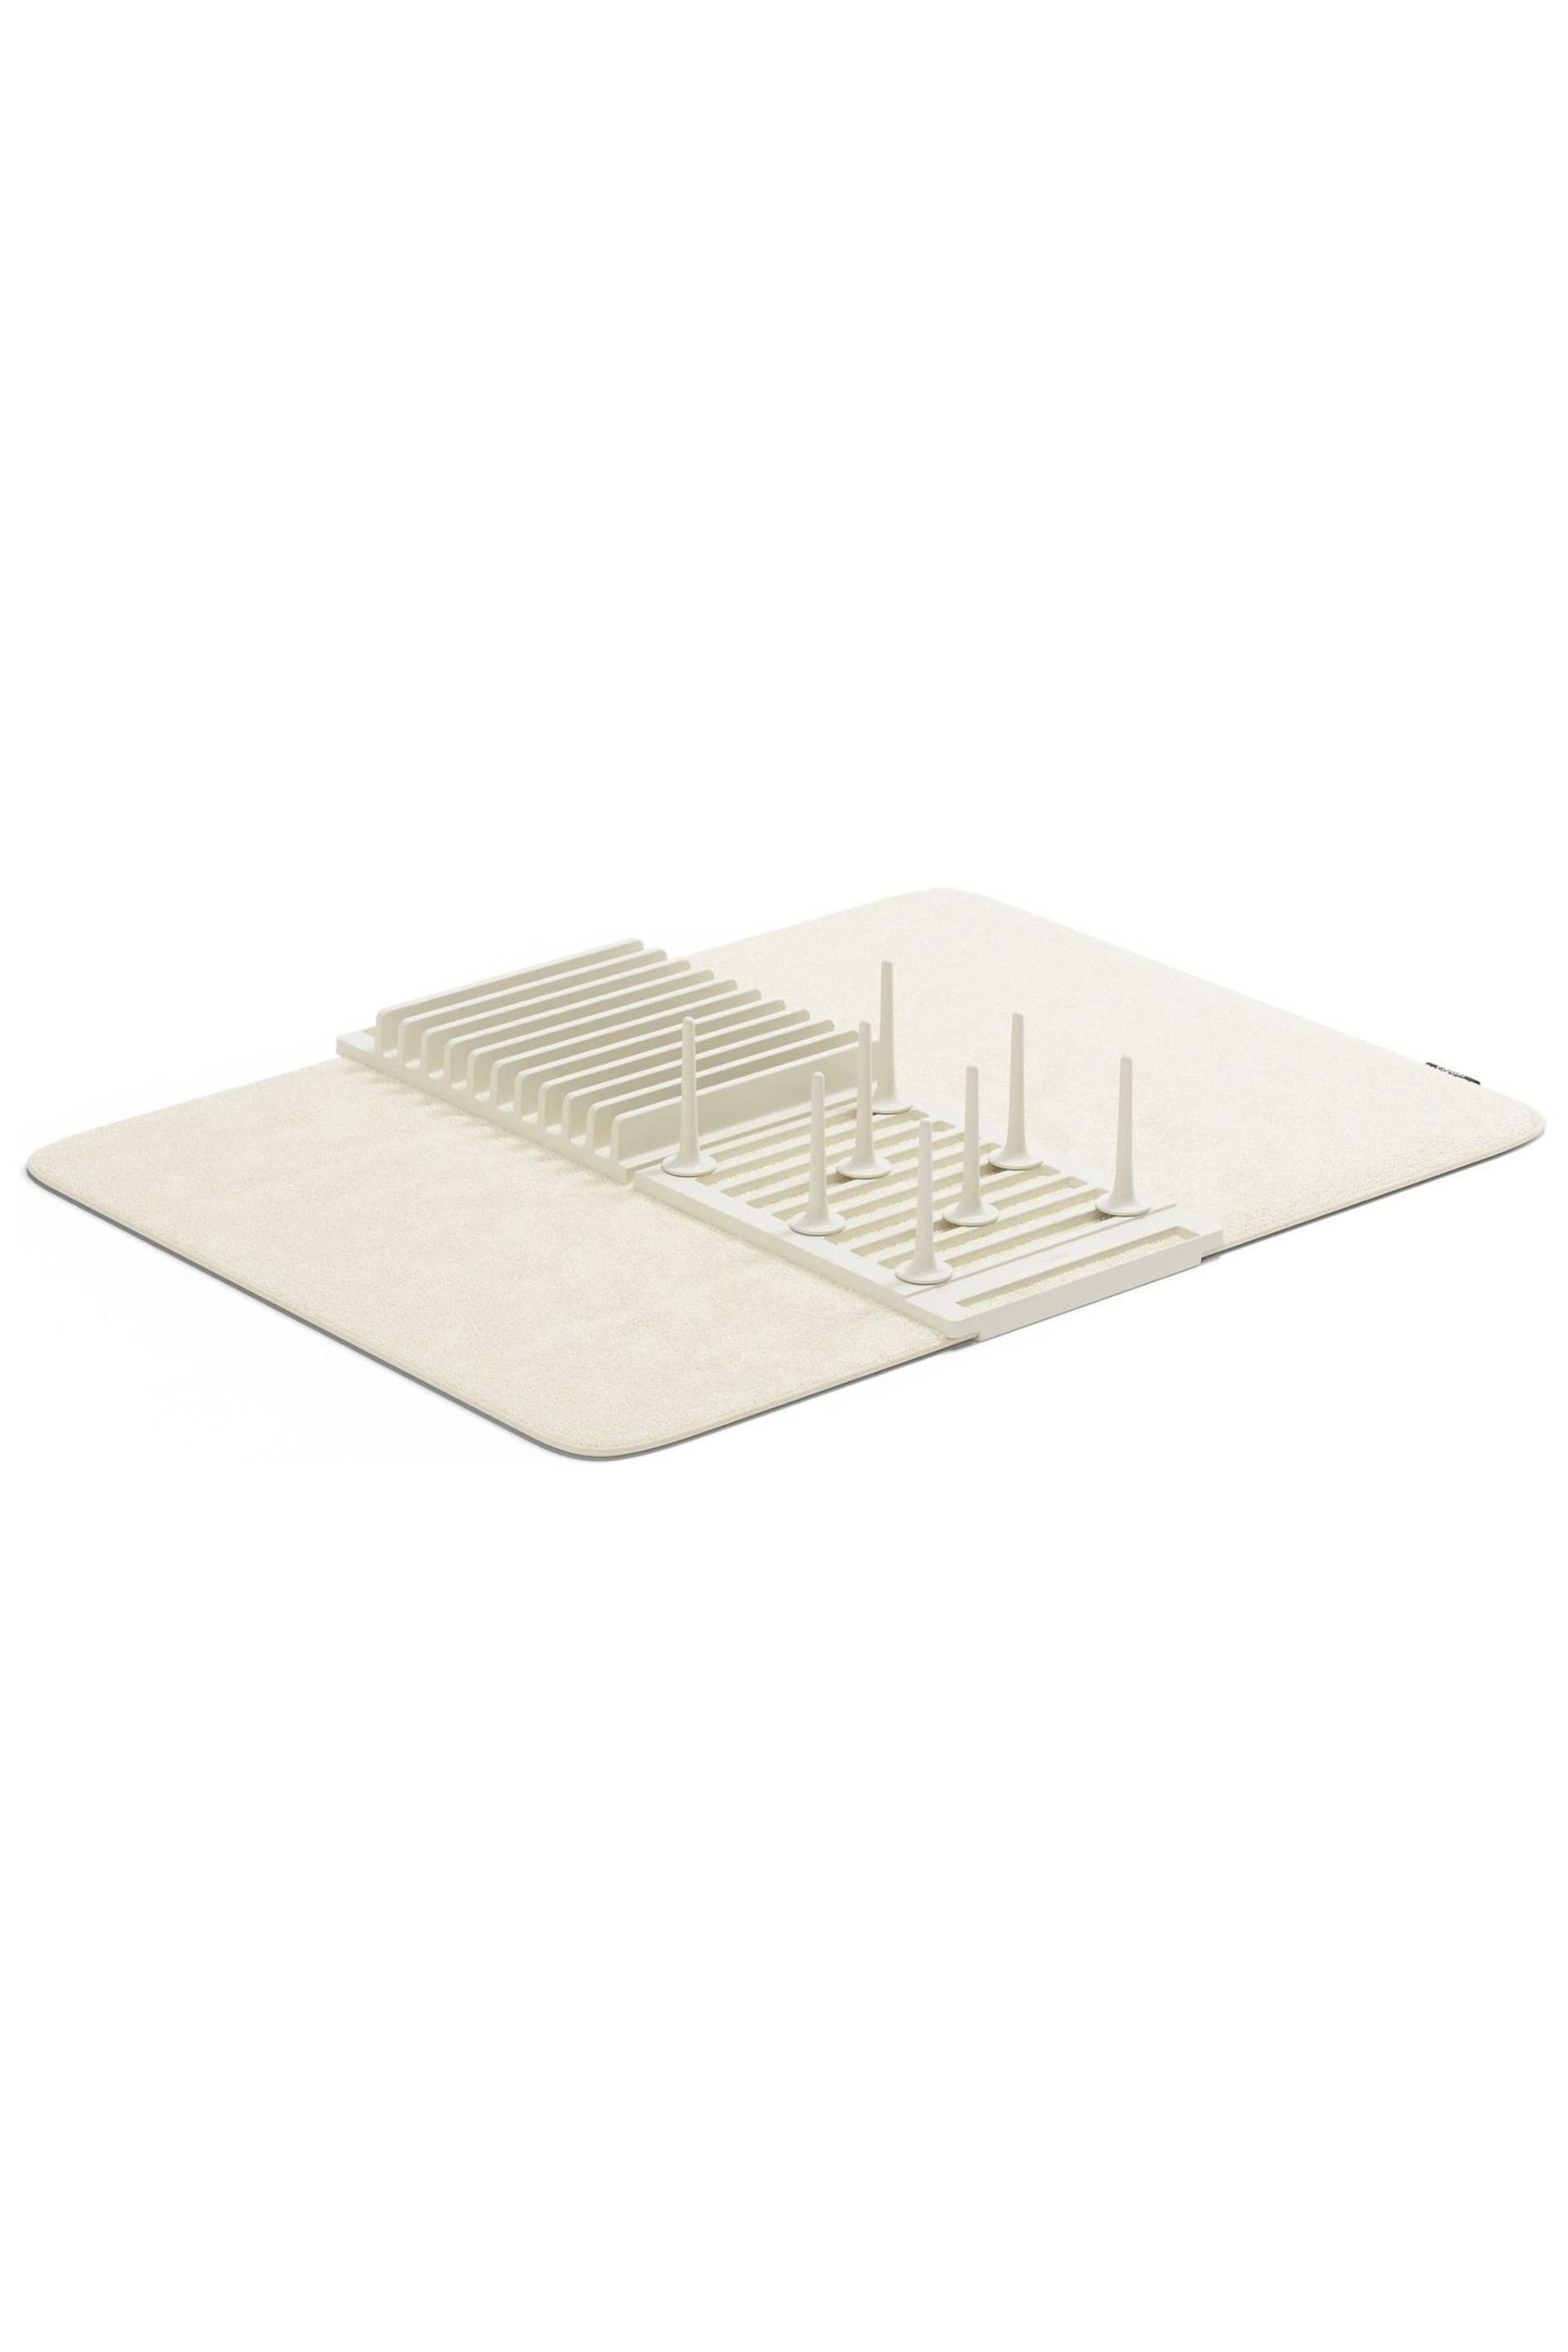 Umbra Cream UDry Drying Rack with Mat - Image 3 of 4